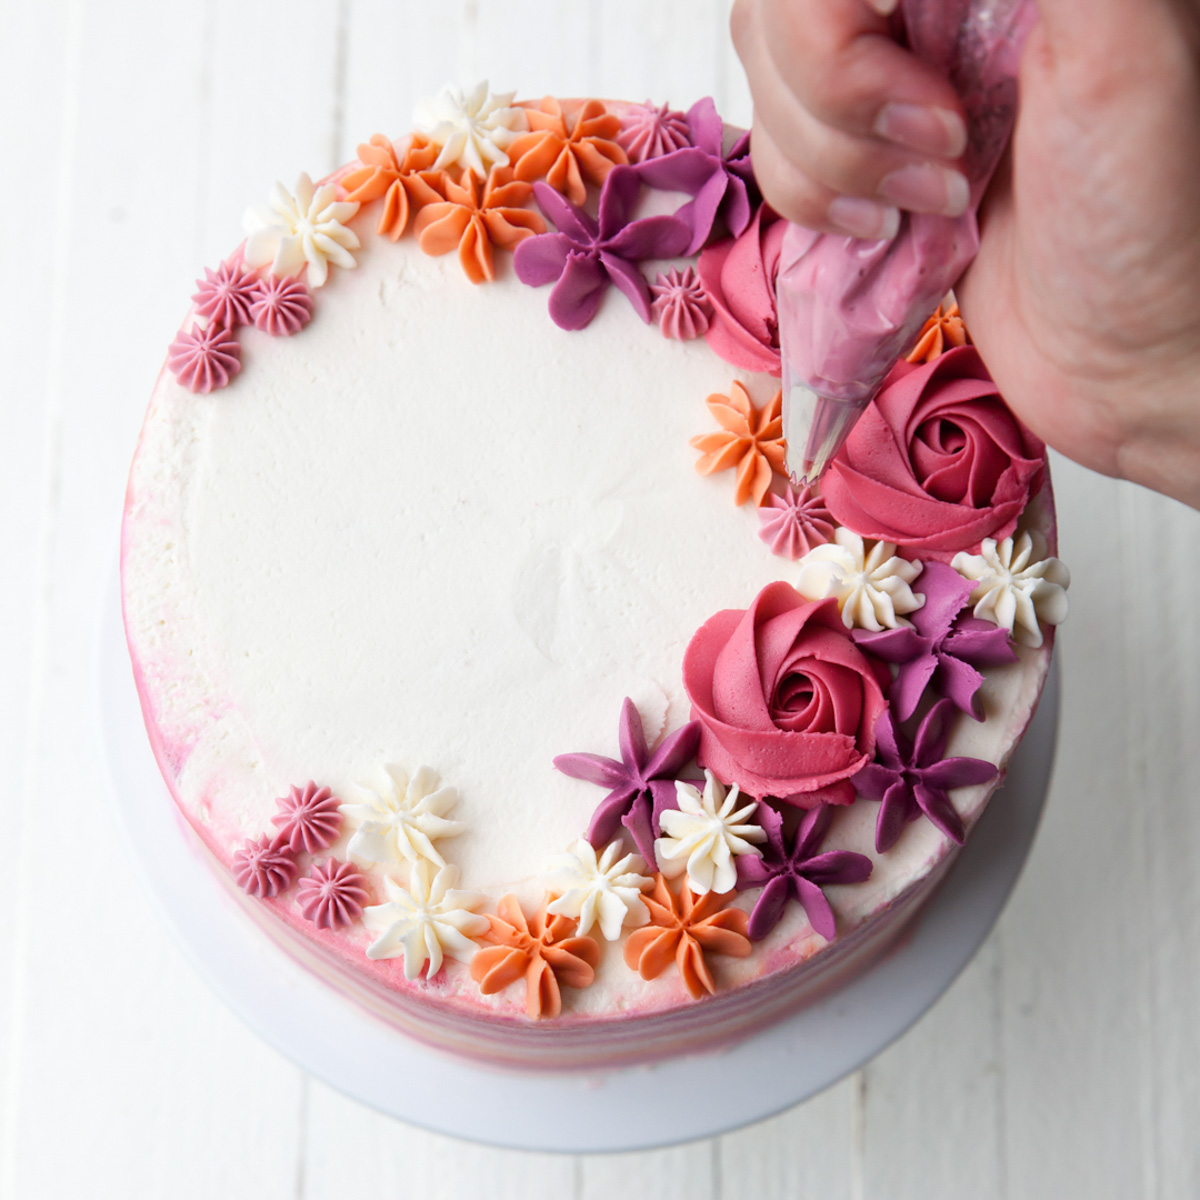 How to make a buttercream flower cake by piping buttercream with a star tip